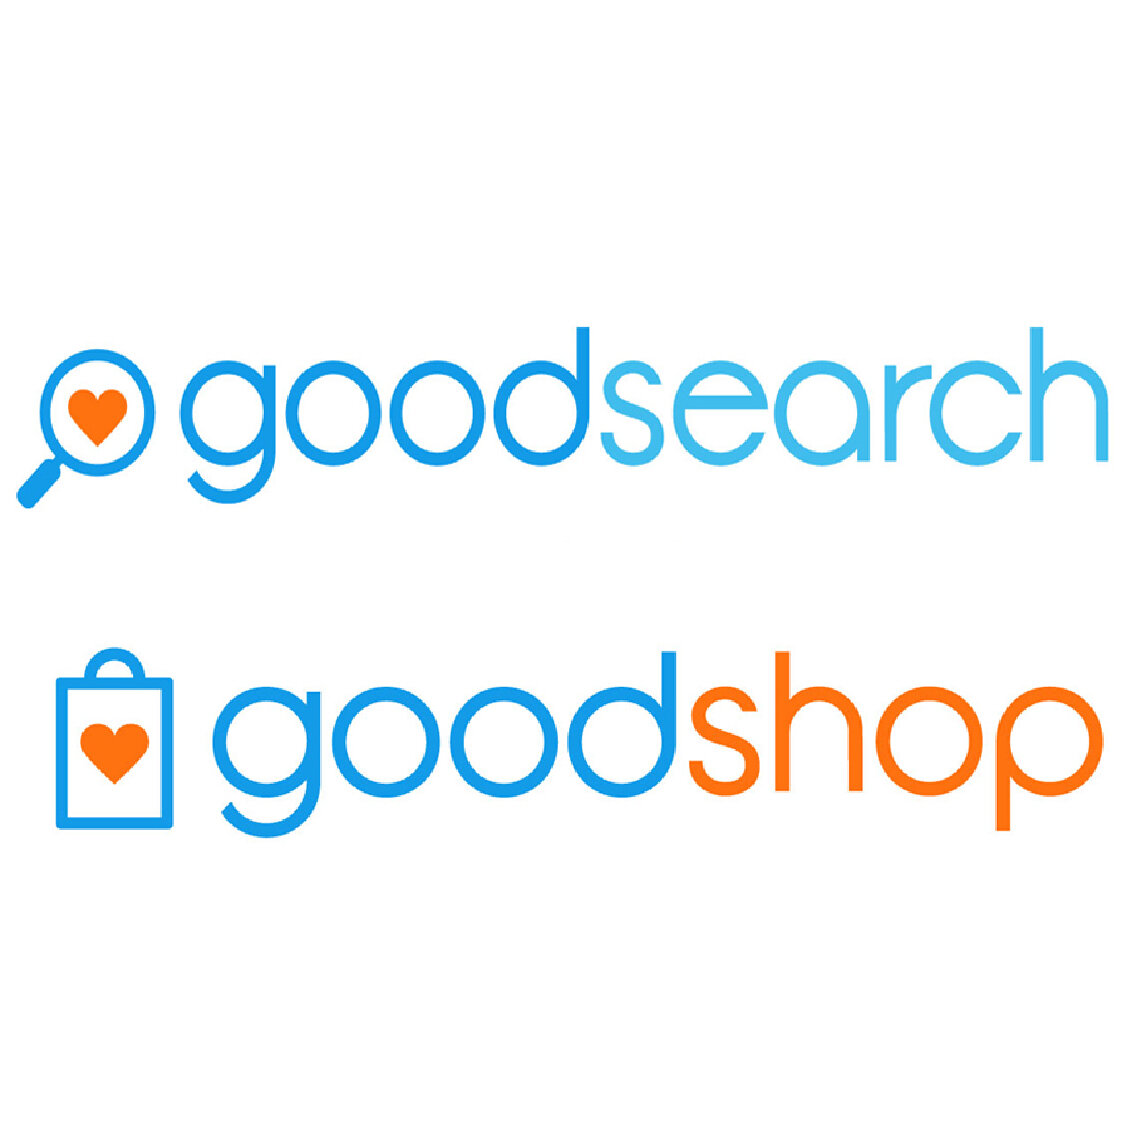 Goodsearch and Goodshop